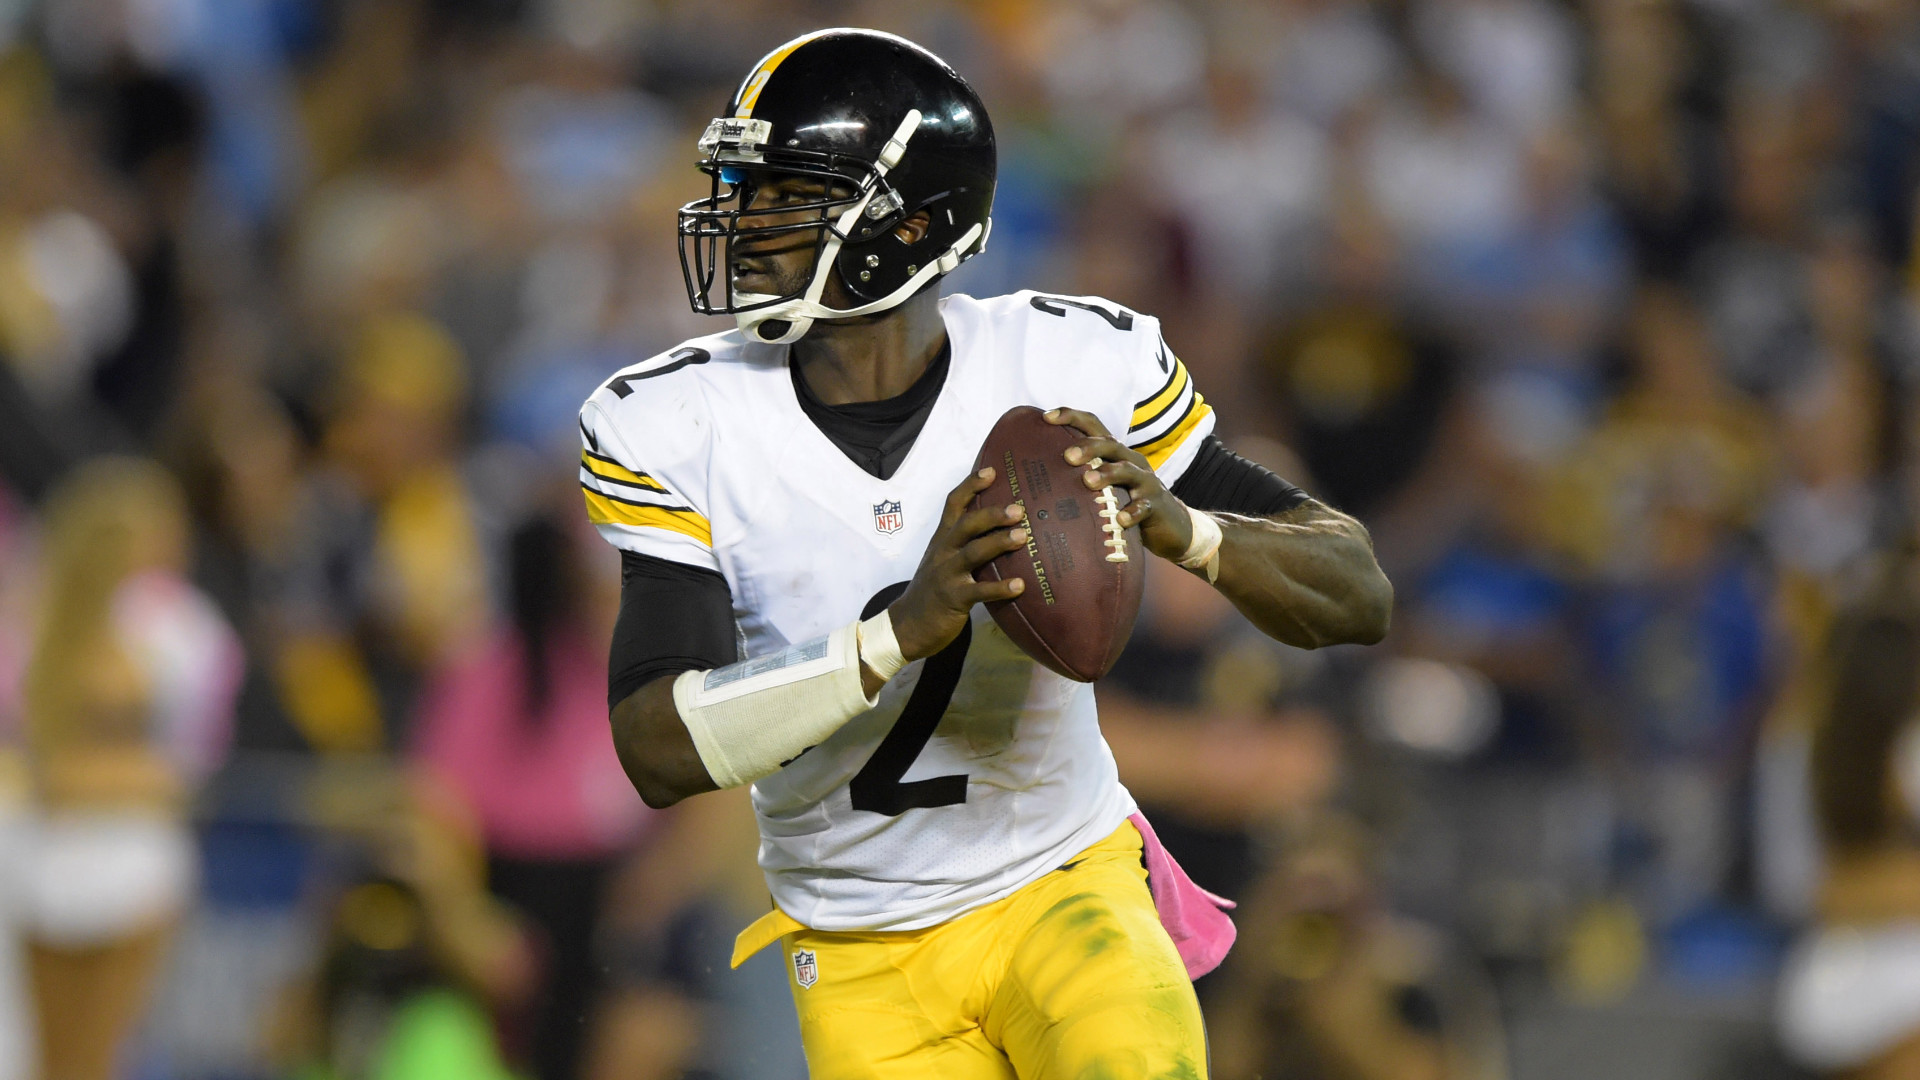 1920x1080 Does Michael Vick have anything left in the tank? | NBC Sports Philadelphia